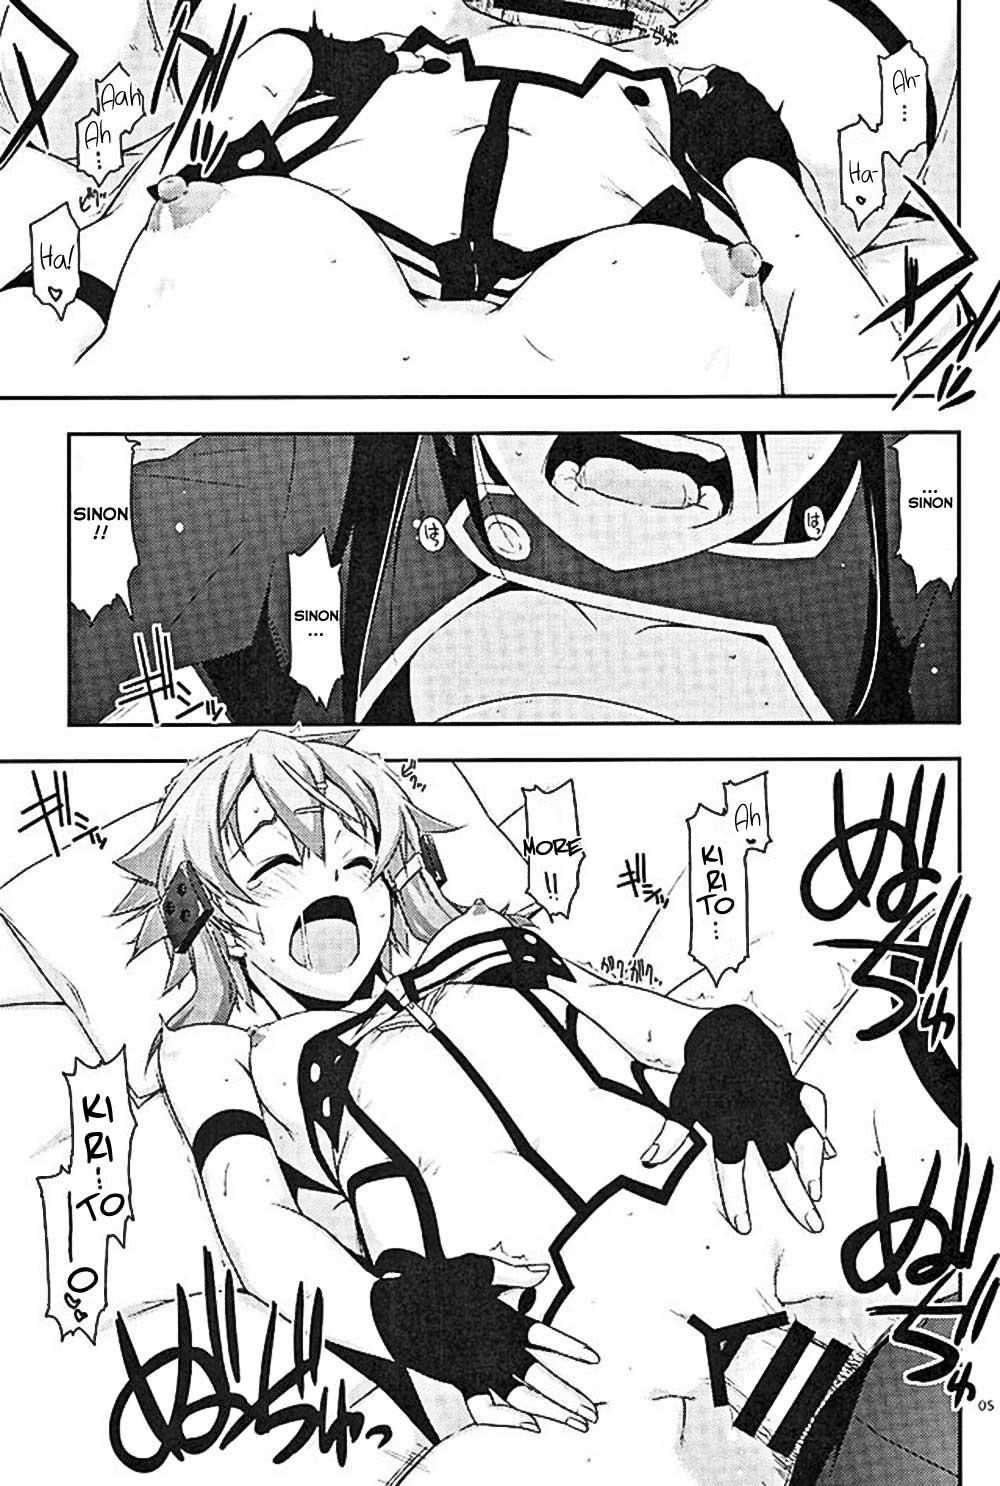 With Envy - Sword art online Yoga - Page 2